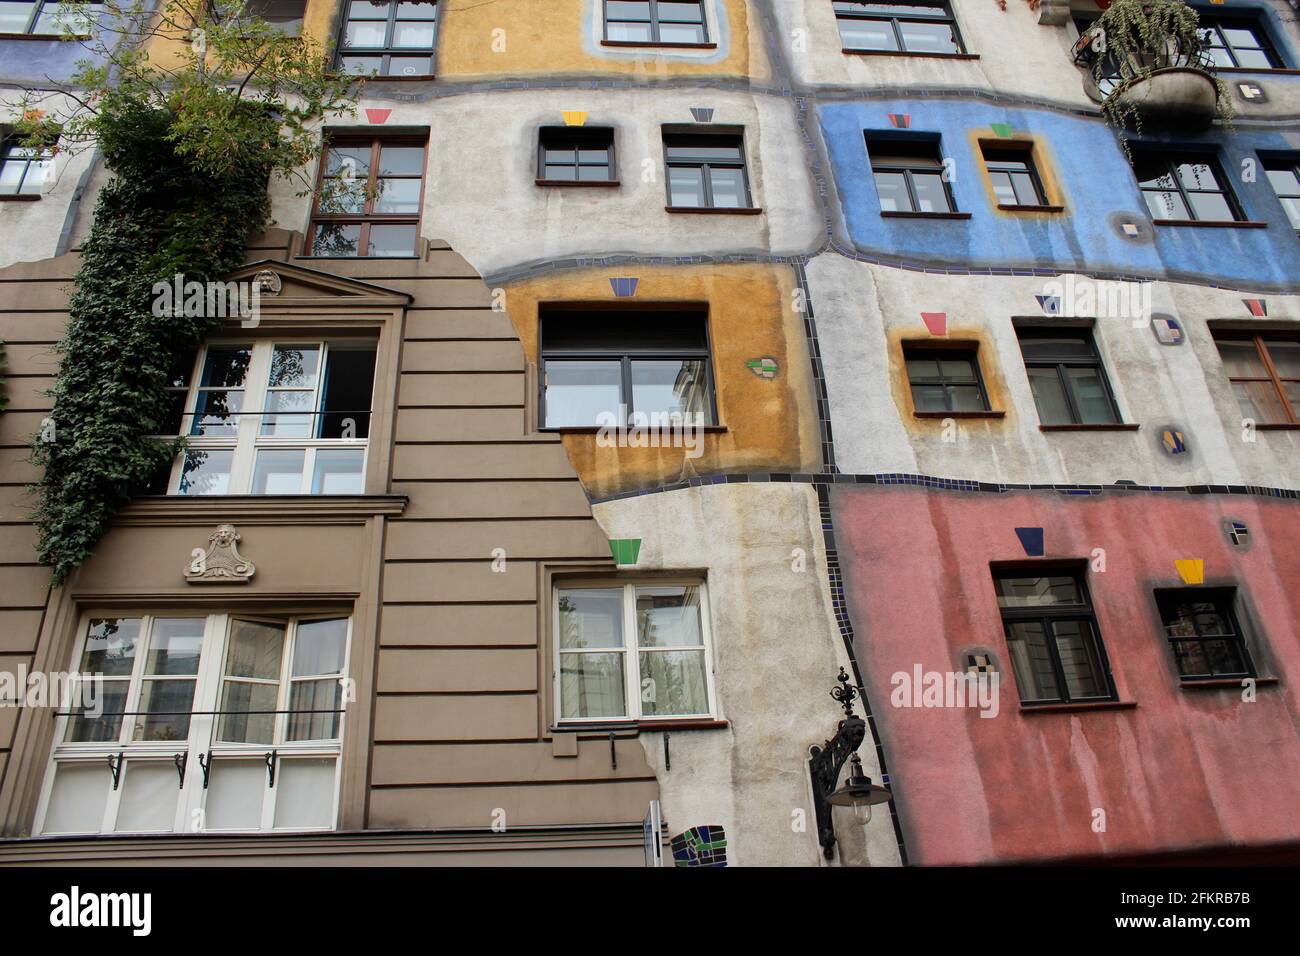 Hundertwasserhaus is an apartment house in Vienna, Austria. Hodgepodge building with eclectic mash up facade Stock Photo